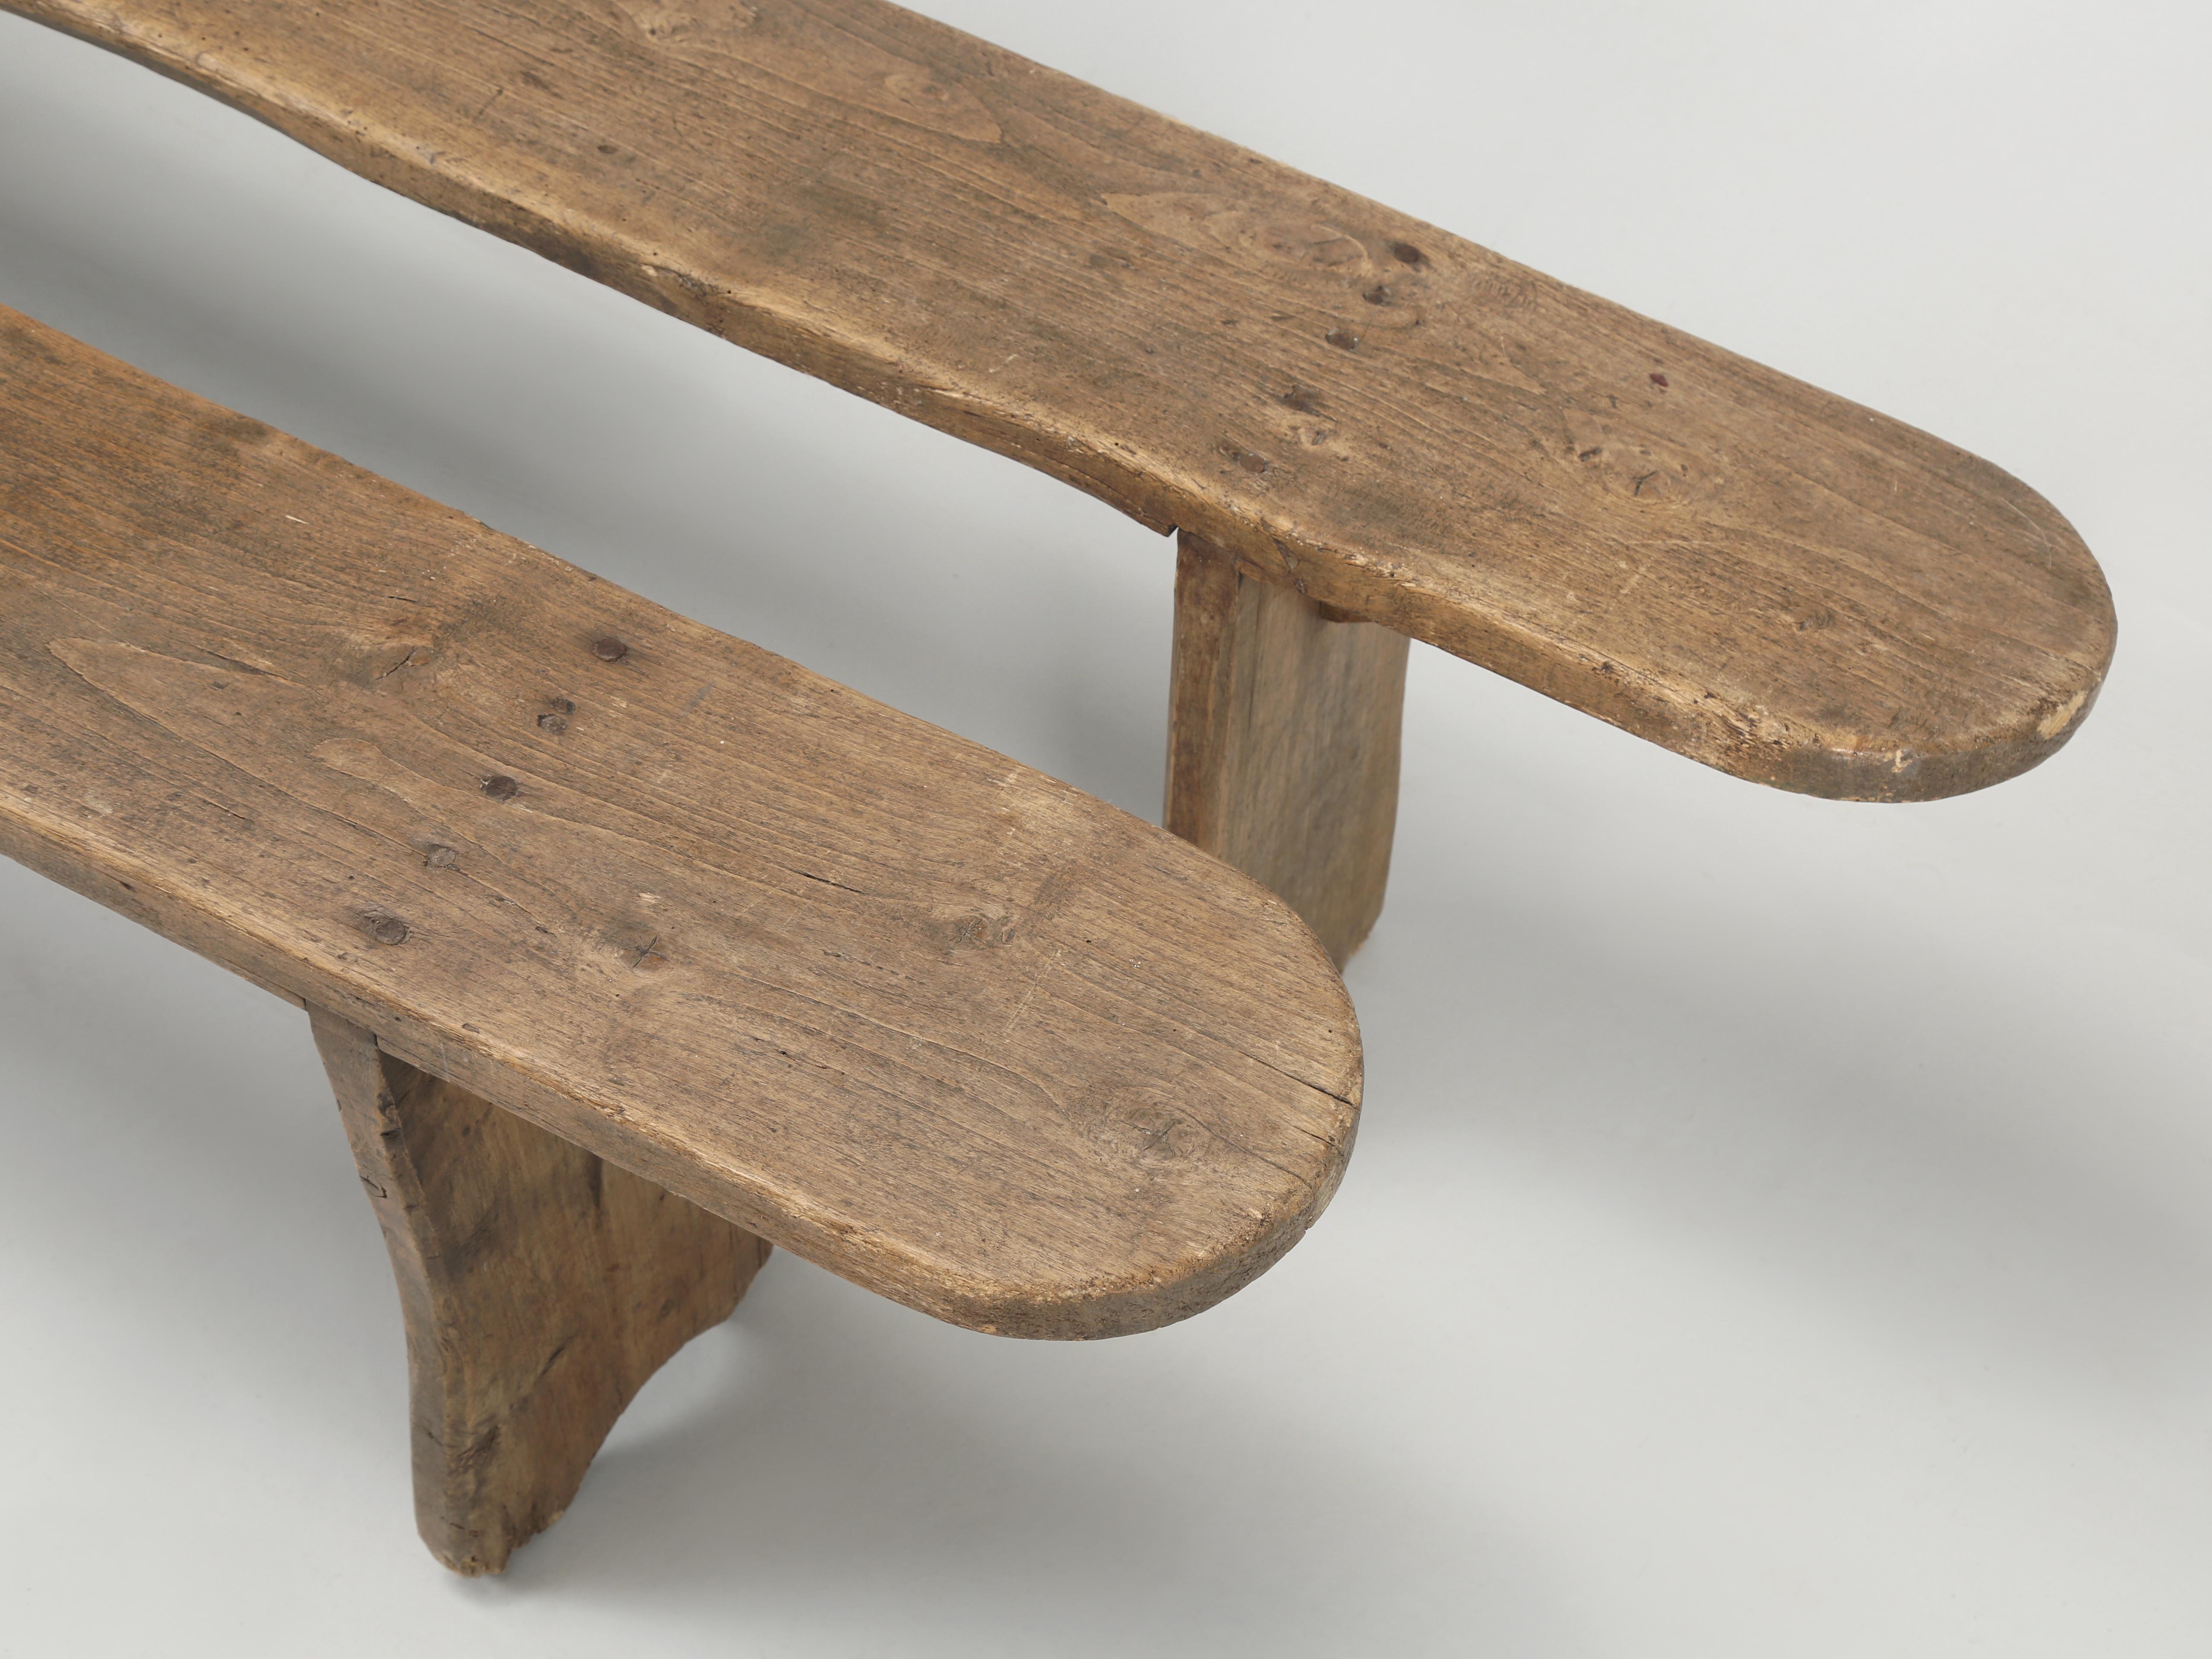 Hand-Crafted Antique Pair of French Farm House Table Benches in Oak Completely Original 1800s